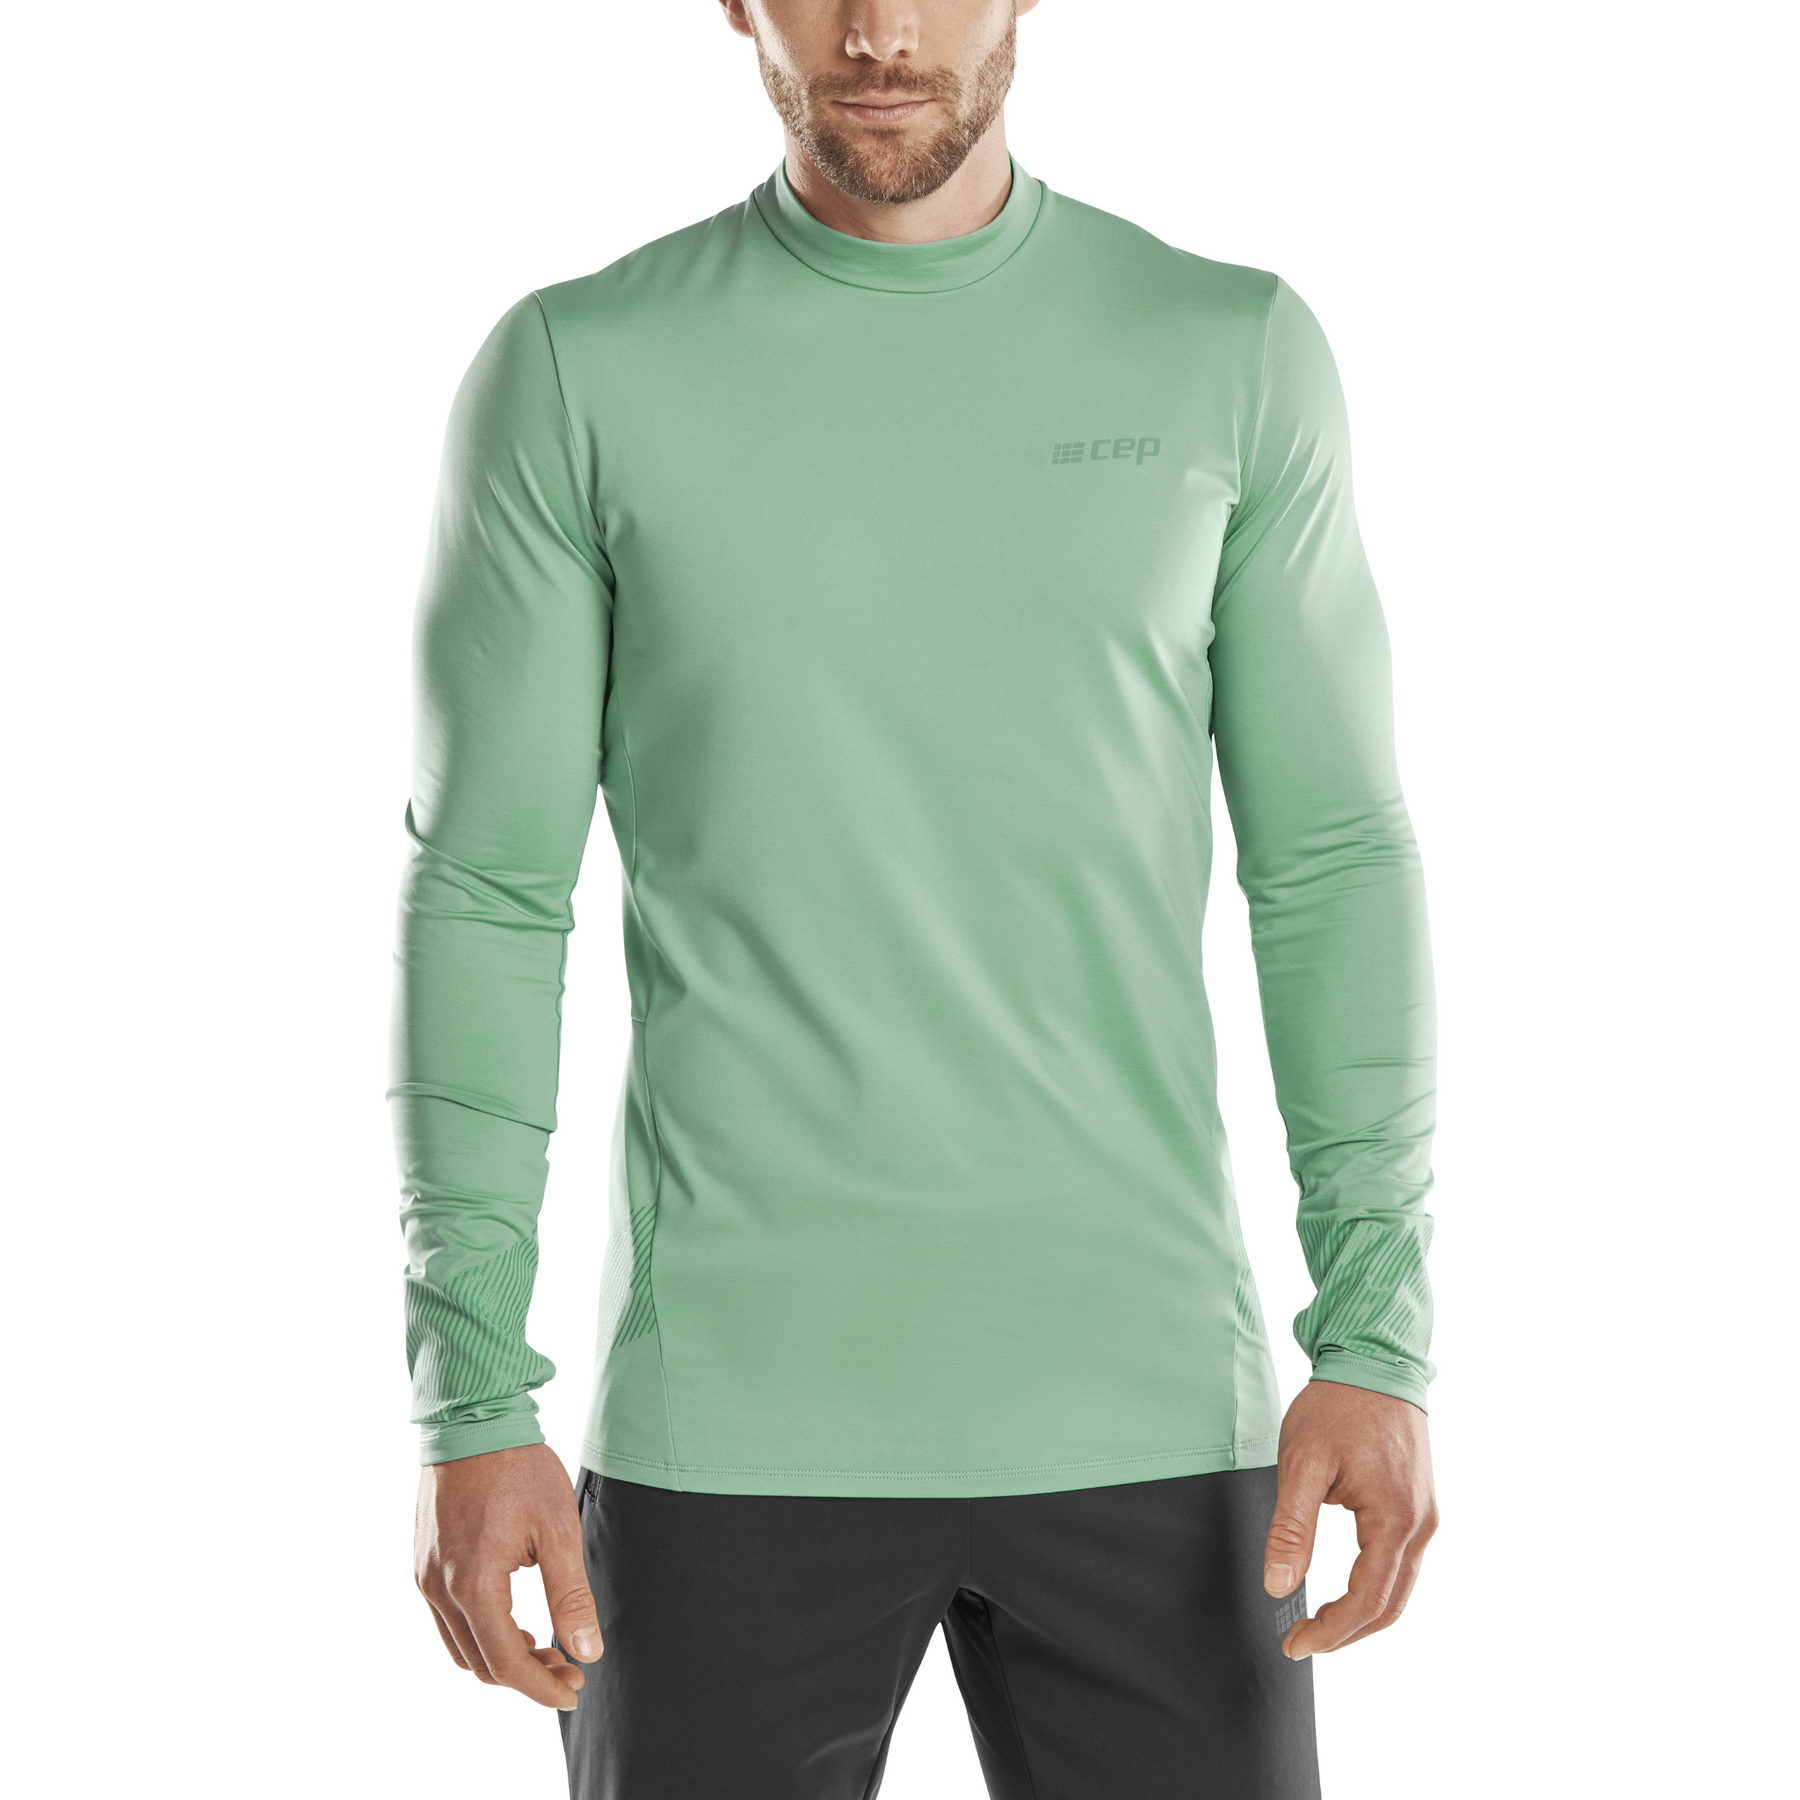 Cold Weather Shirt for Men  CEP Athletic Compression Sportswear